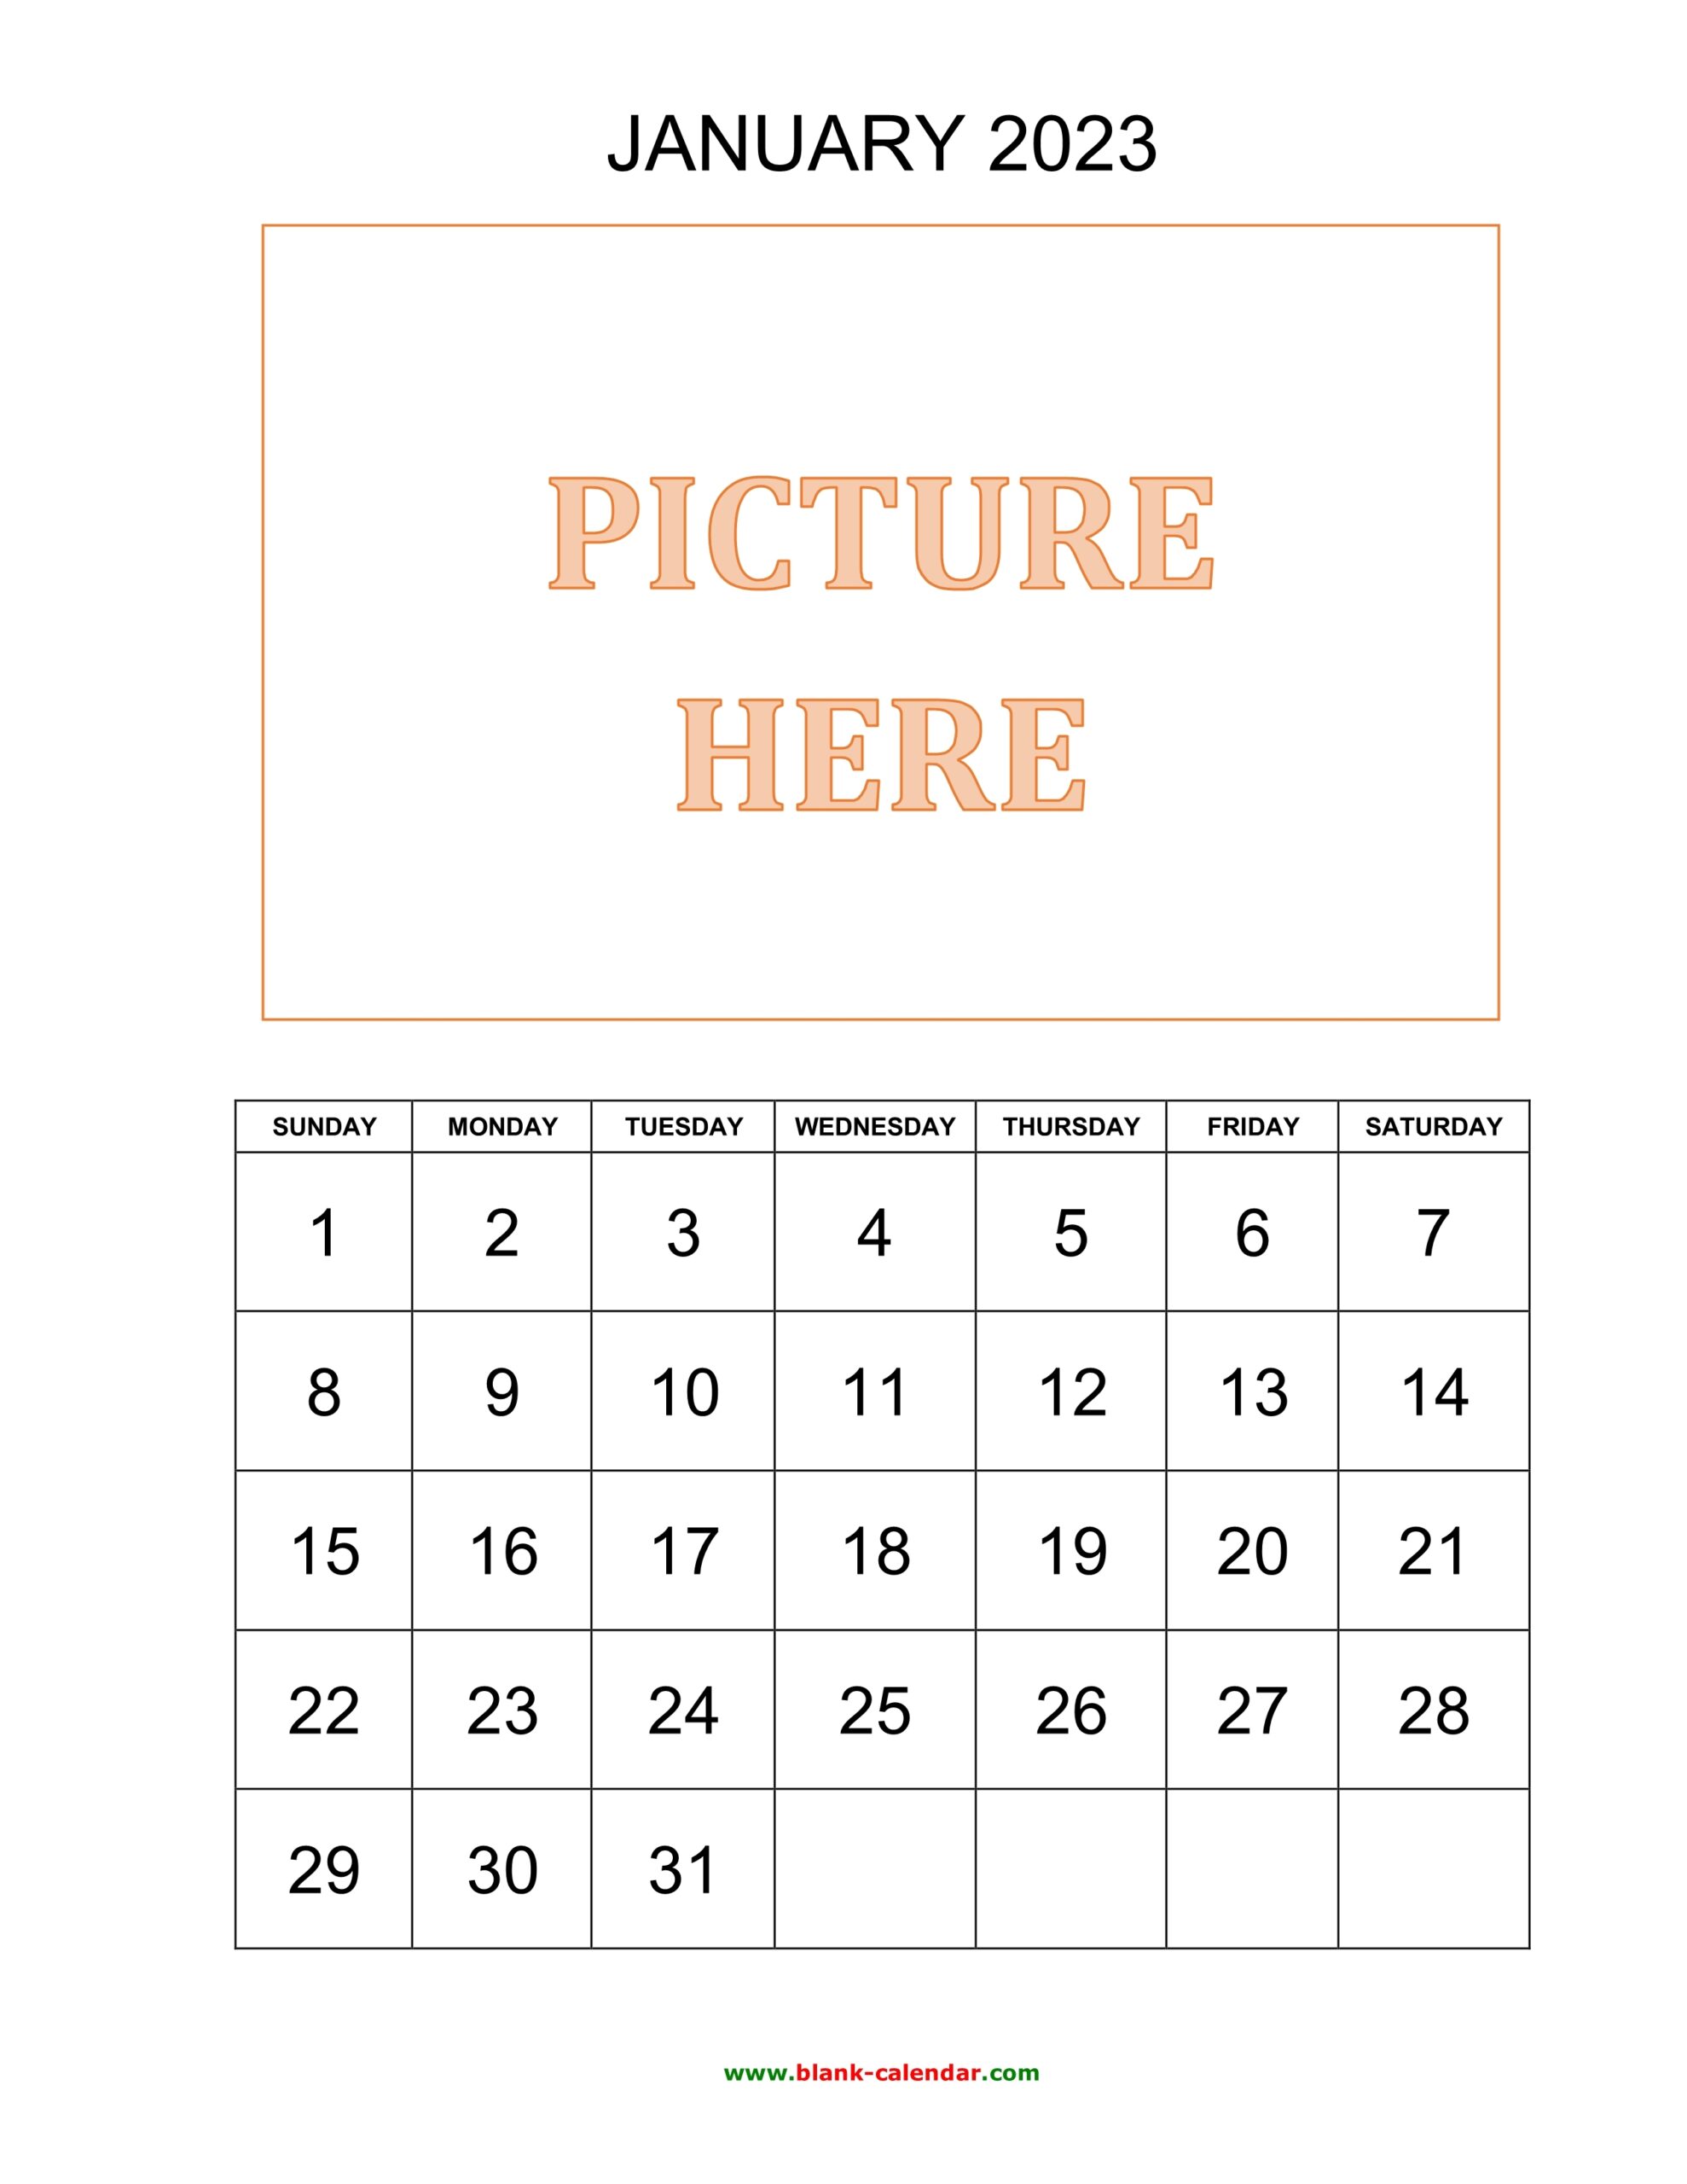 Free Download Printable Calendar 2023 Pictures Can Be Placed At The Top